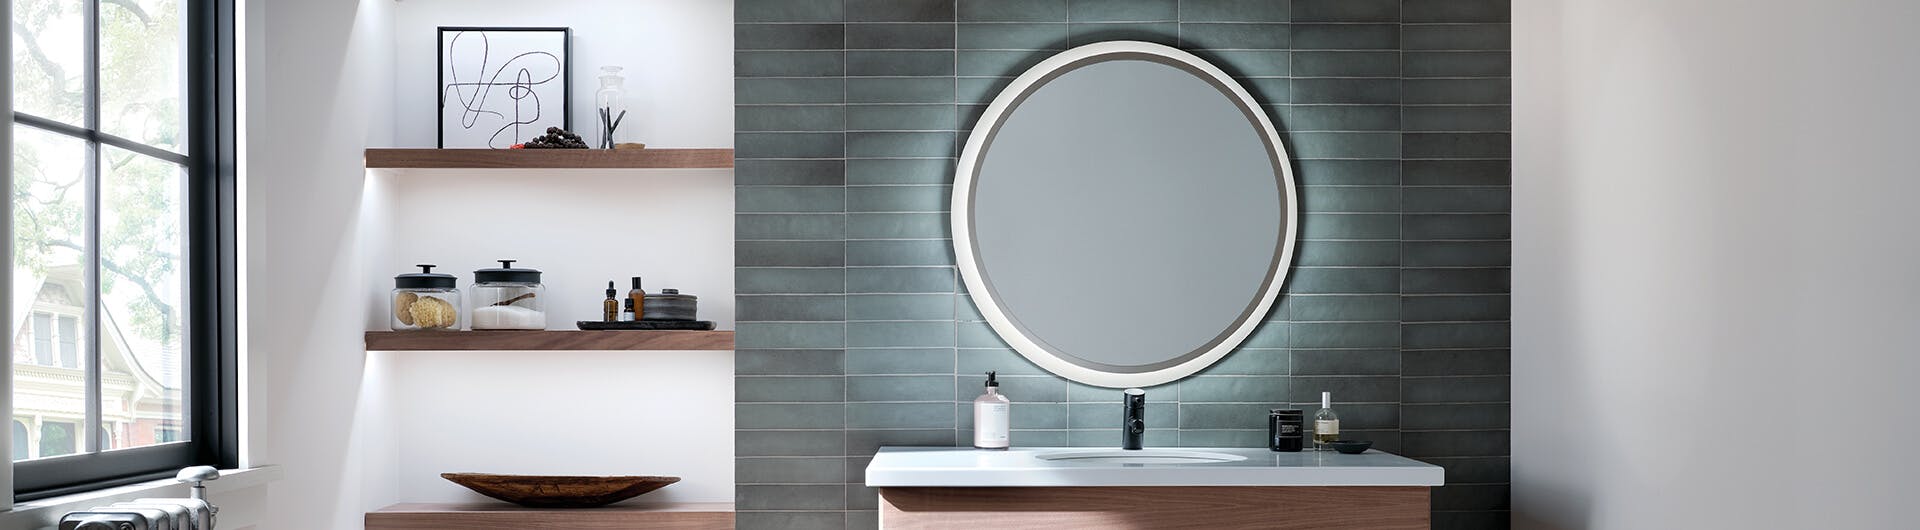 Bathroom during the day featuring a round ryame mirror with LED edge